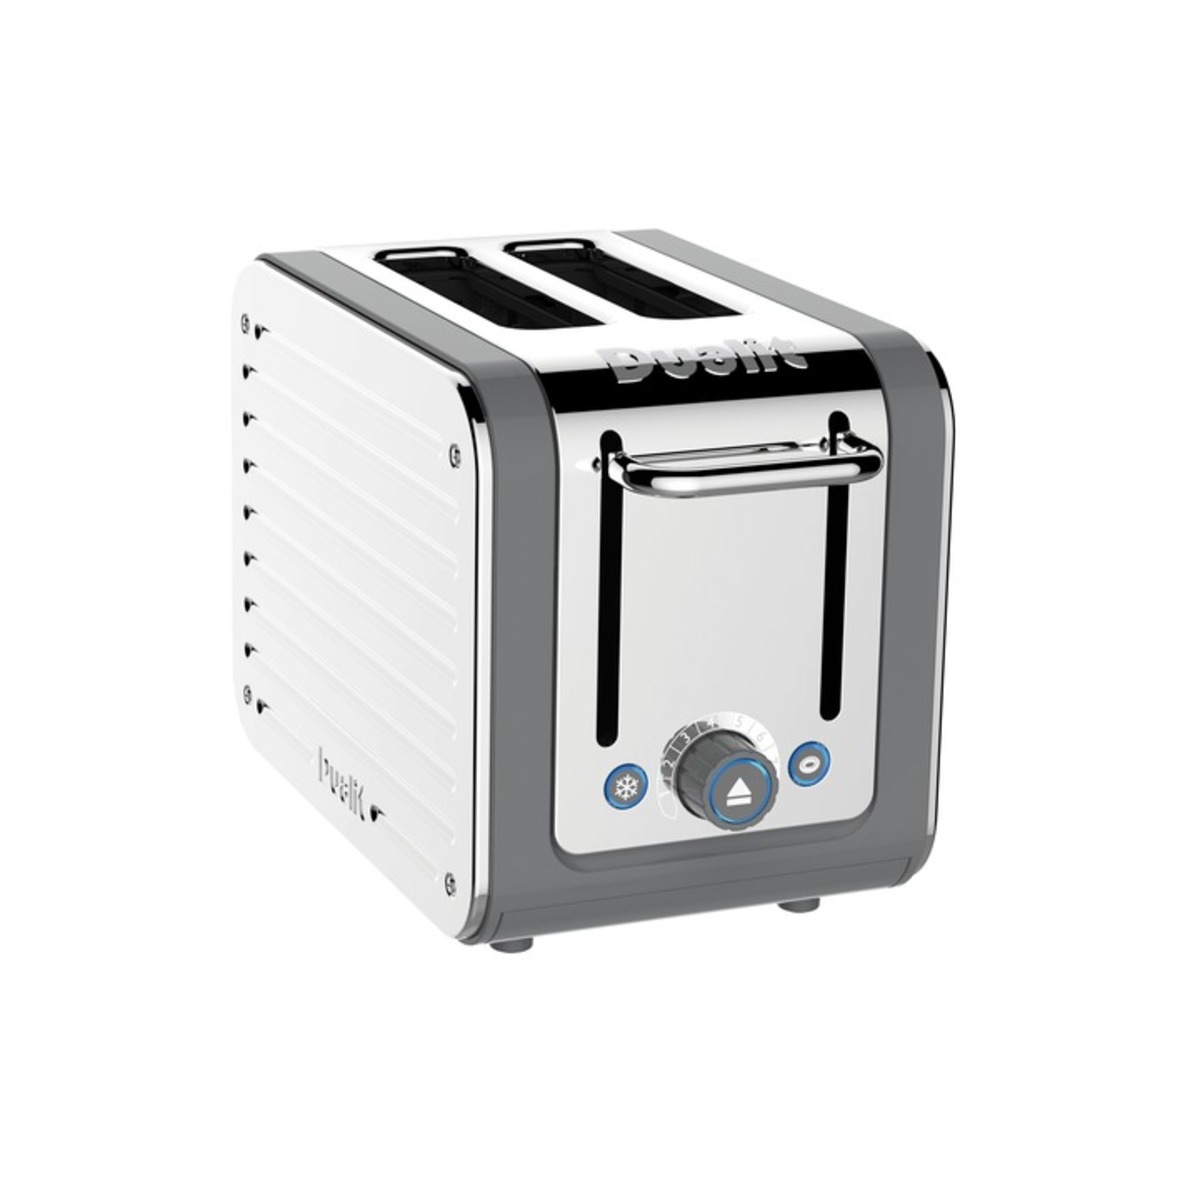 Dualit 26526 ARCHITECT 2 Slot Toaster, Grey/Stainless Steel